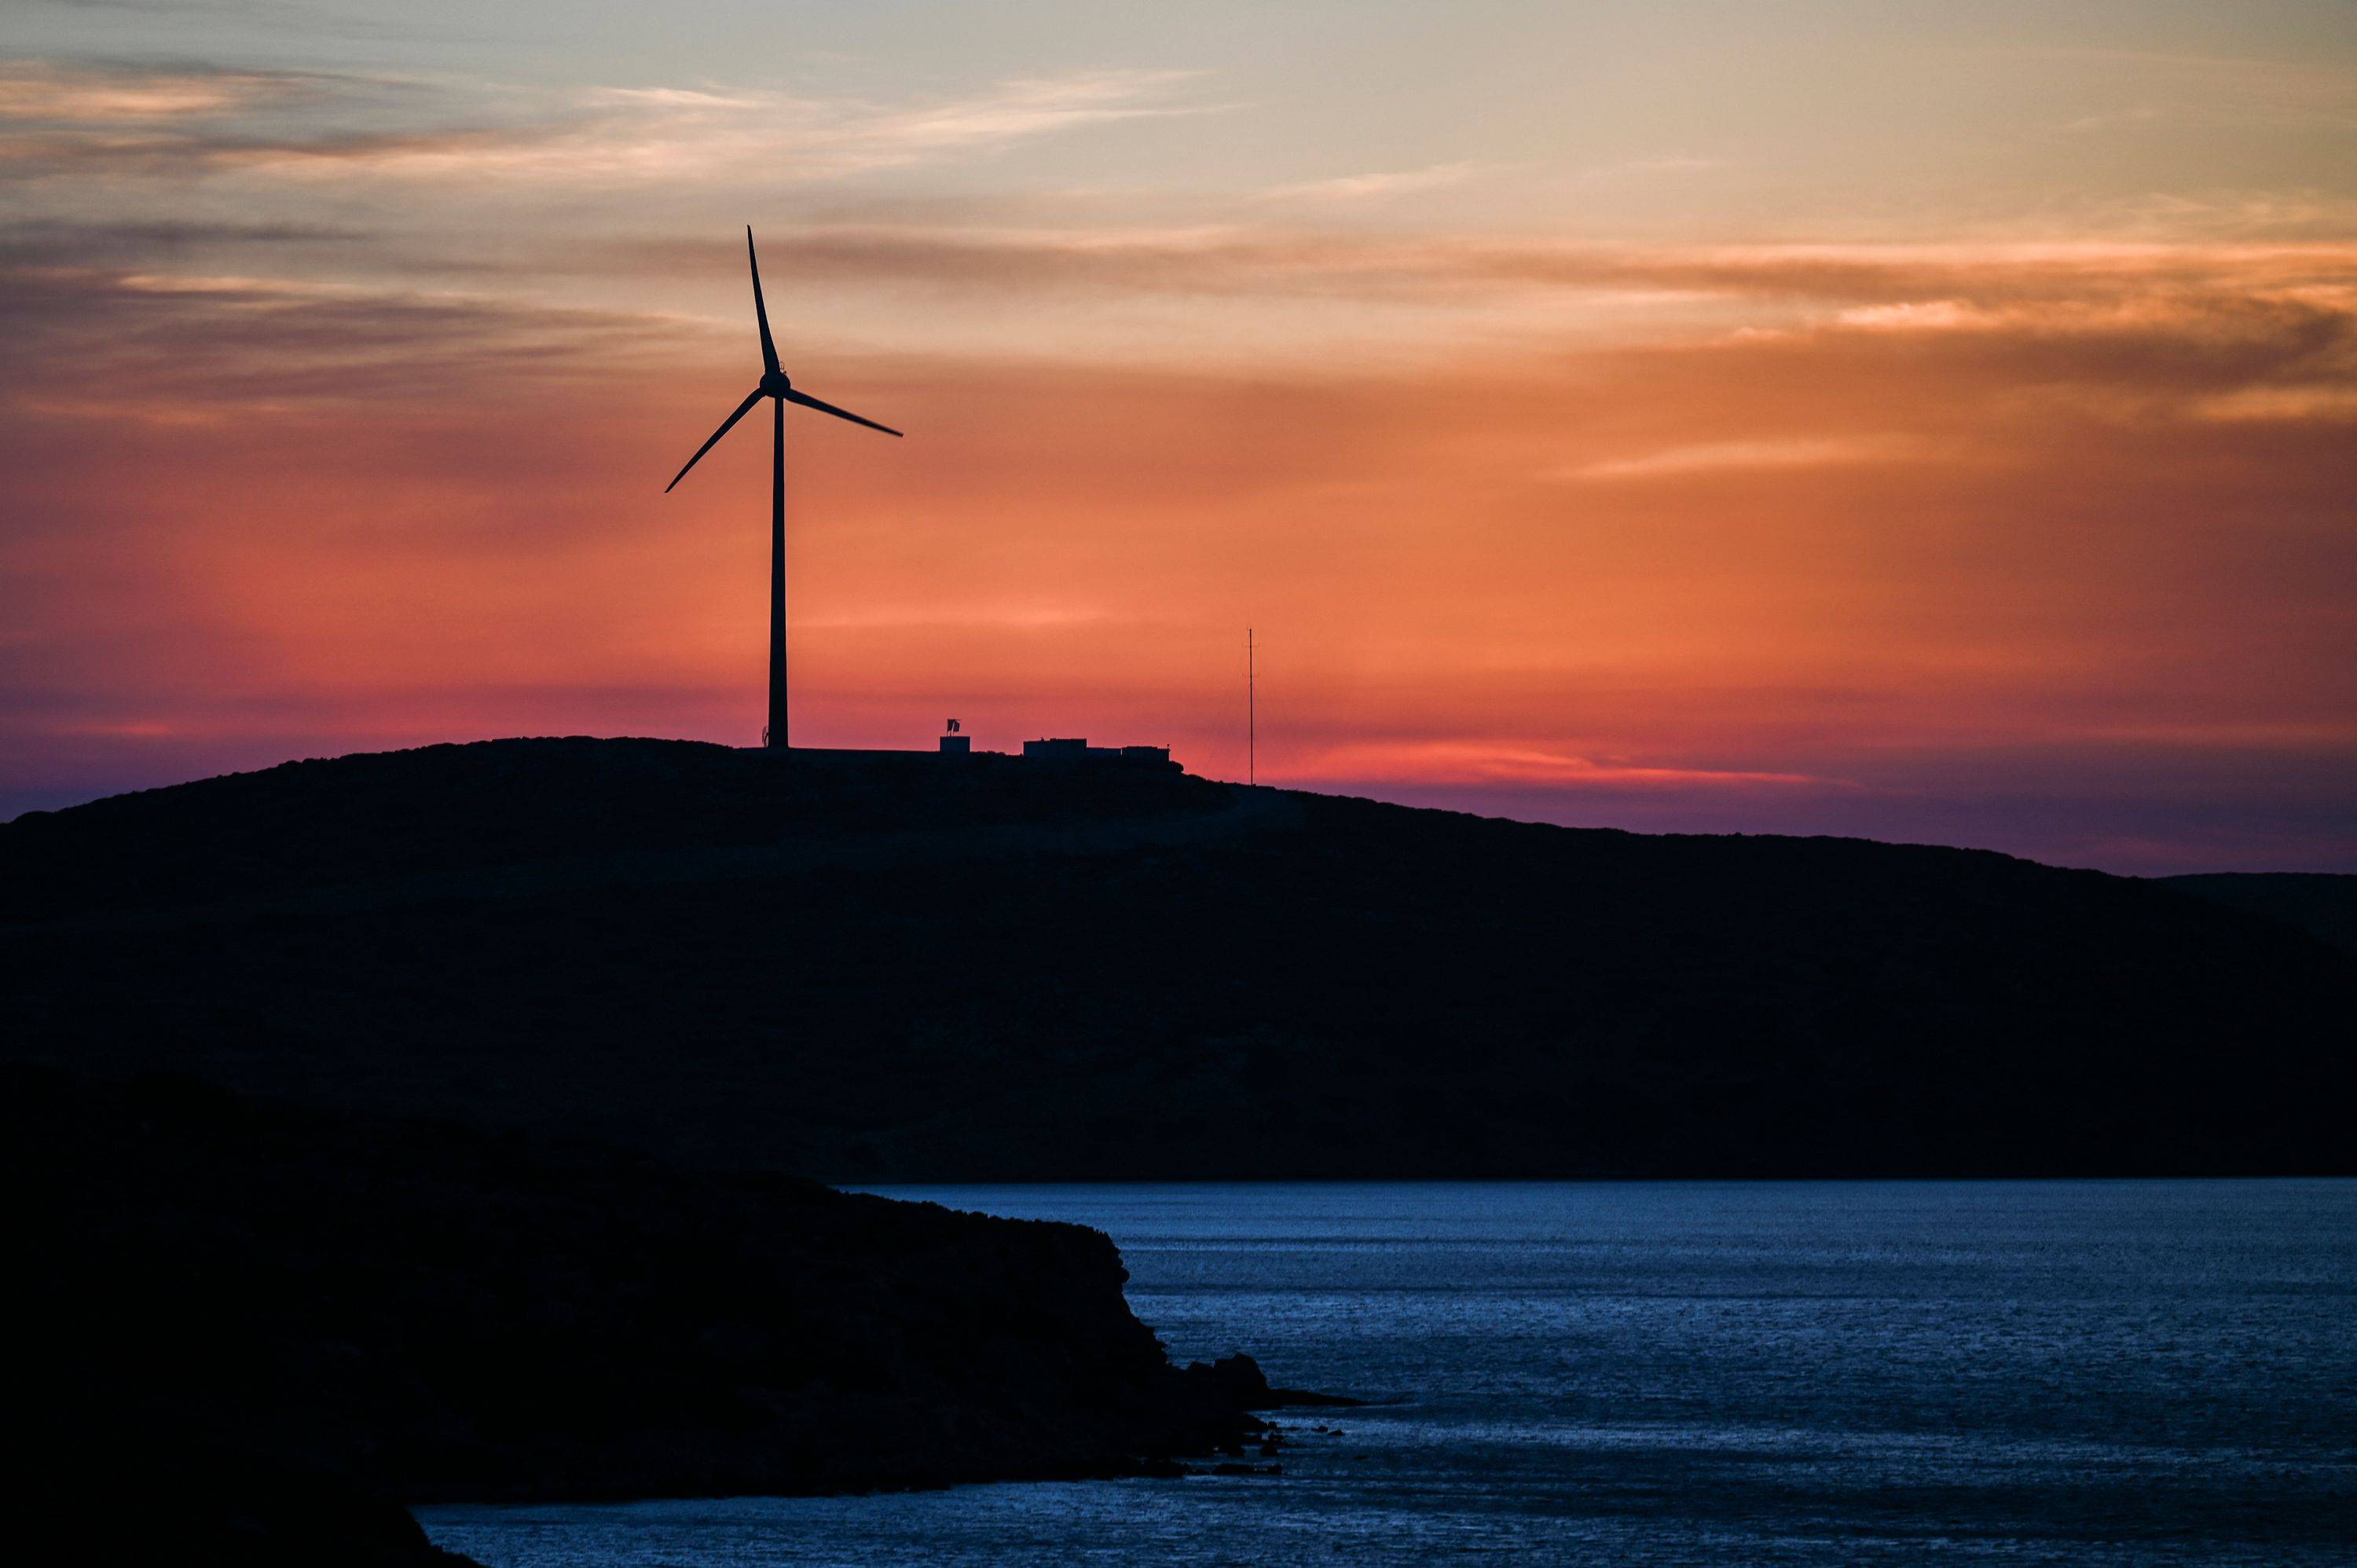 A wind turbine in Tilos island in Greece in June. Under Japan's draft basic energy policy for fiscal 2030, renewable energy will account for 36% to 38% of total power production, up from 22% to 24% in the previous plan. | AFP-JIJI